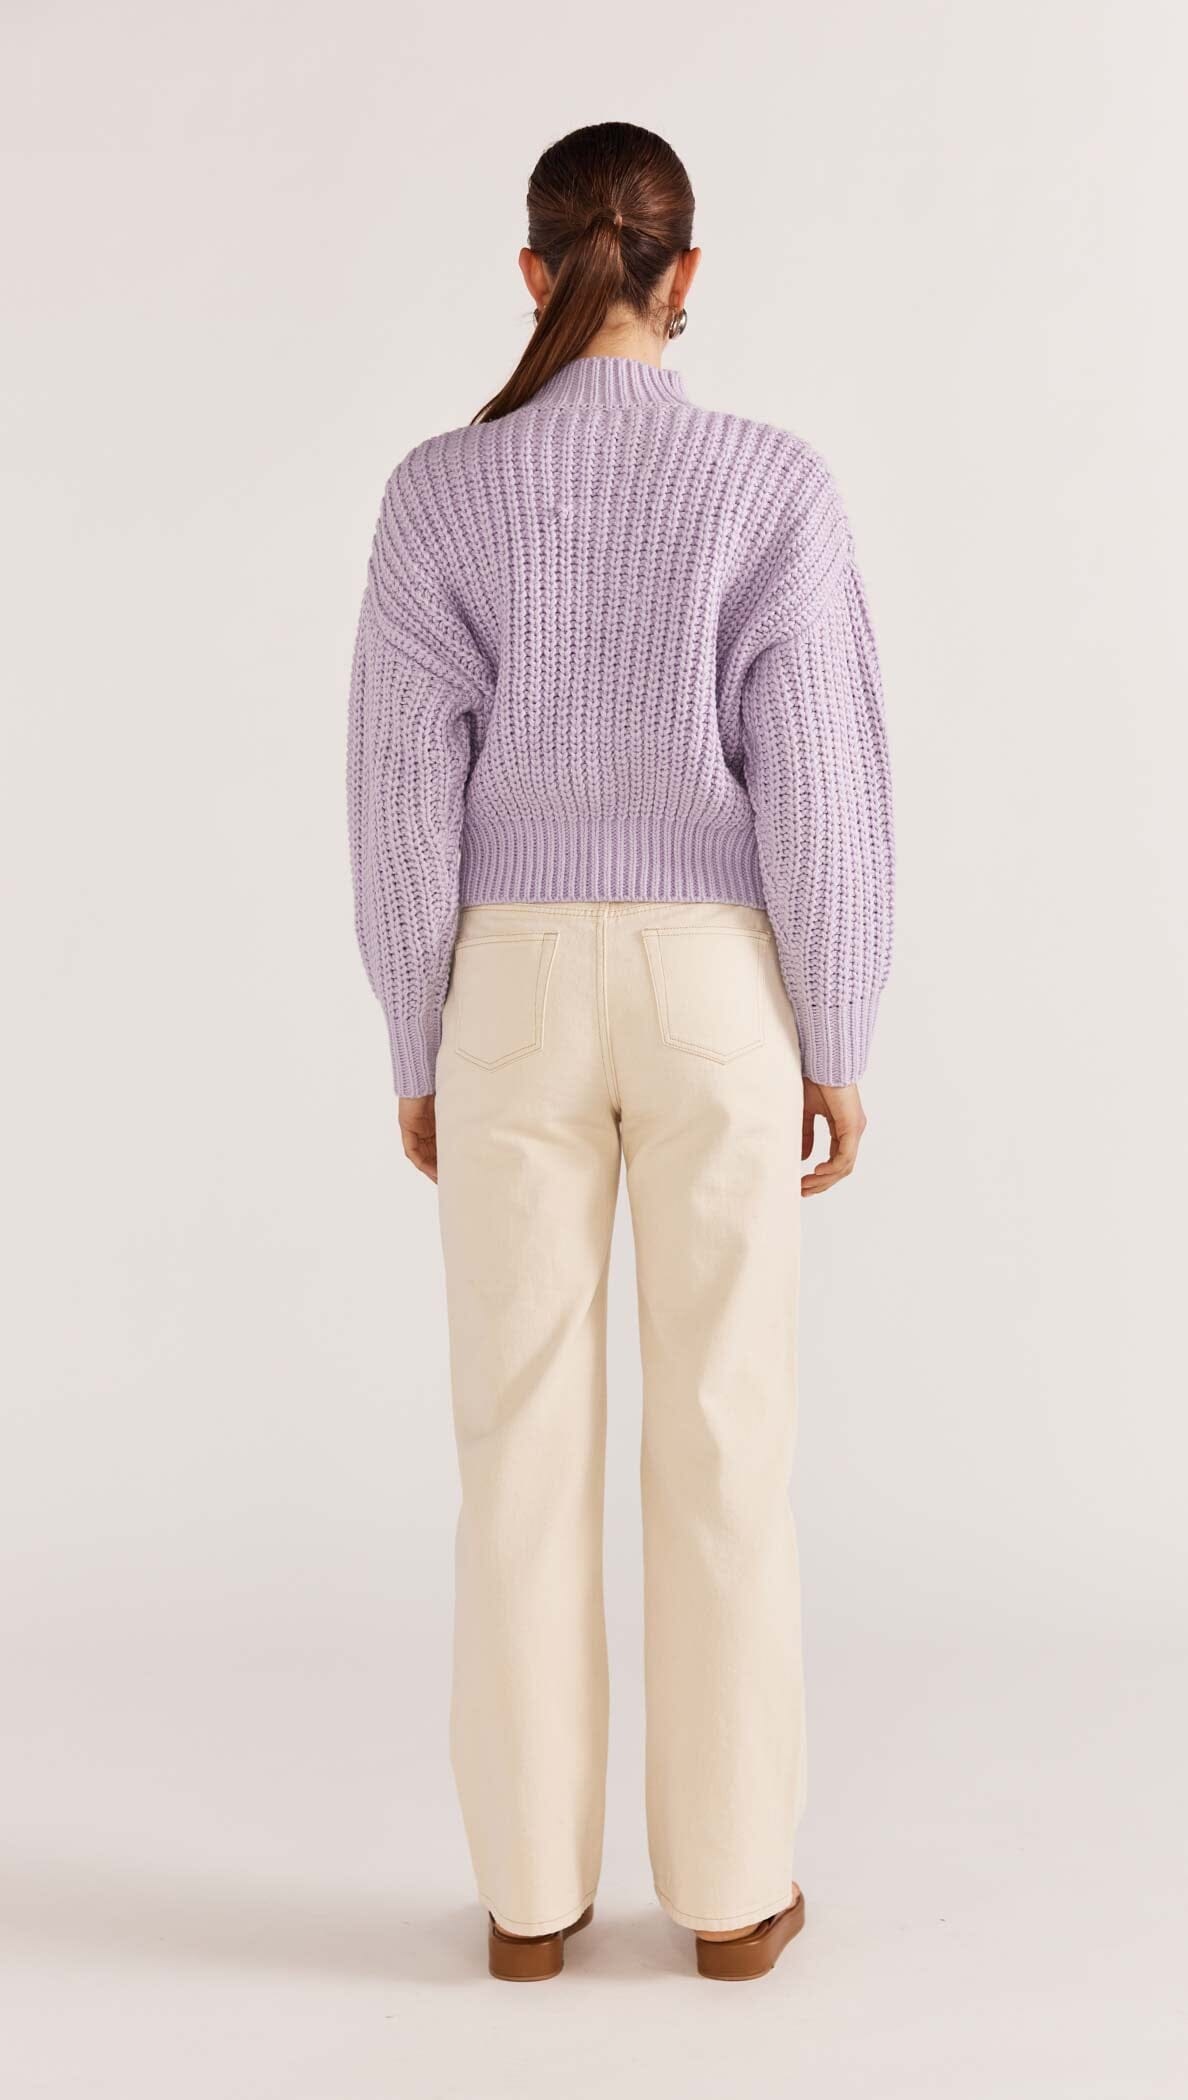 STAPLE THE LABEL - MYLES JUMPER - Lilac Womens STAPLE THE LABEL